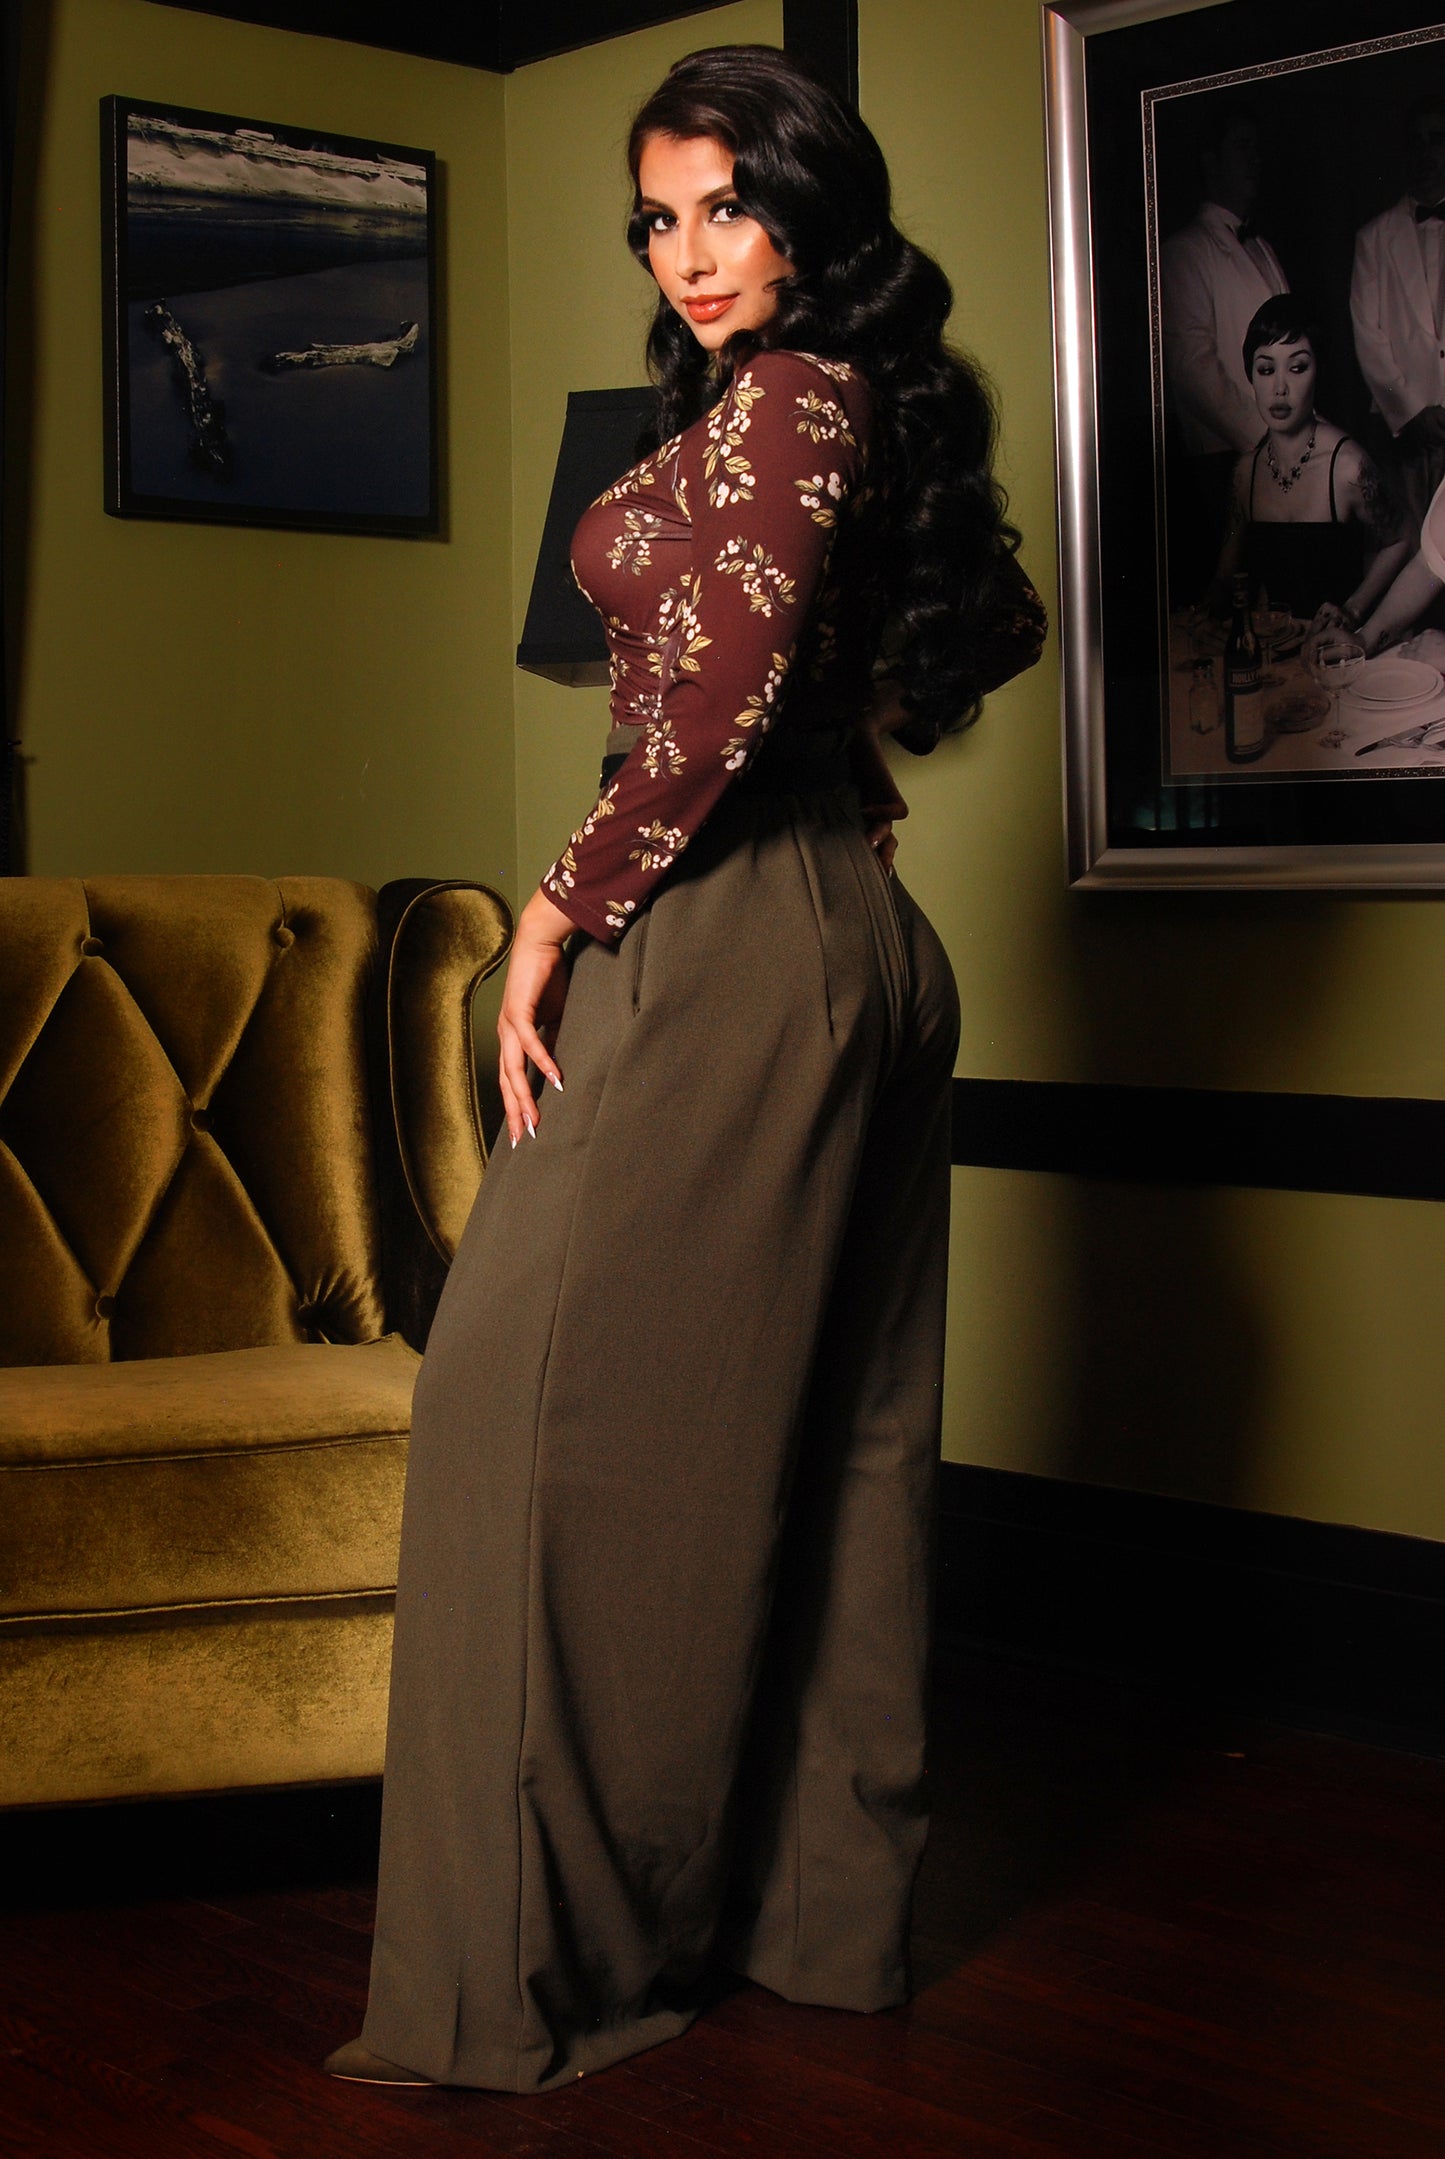 Coming Soon - Dietrich Vintage Wide Leg Palazzo Pants in Olive Crepe 30" Inseam | Laura Byrnes Design